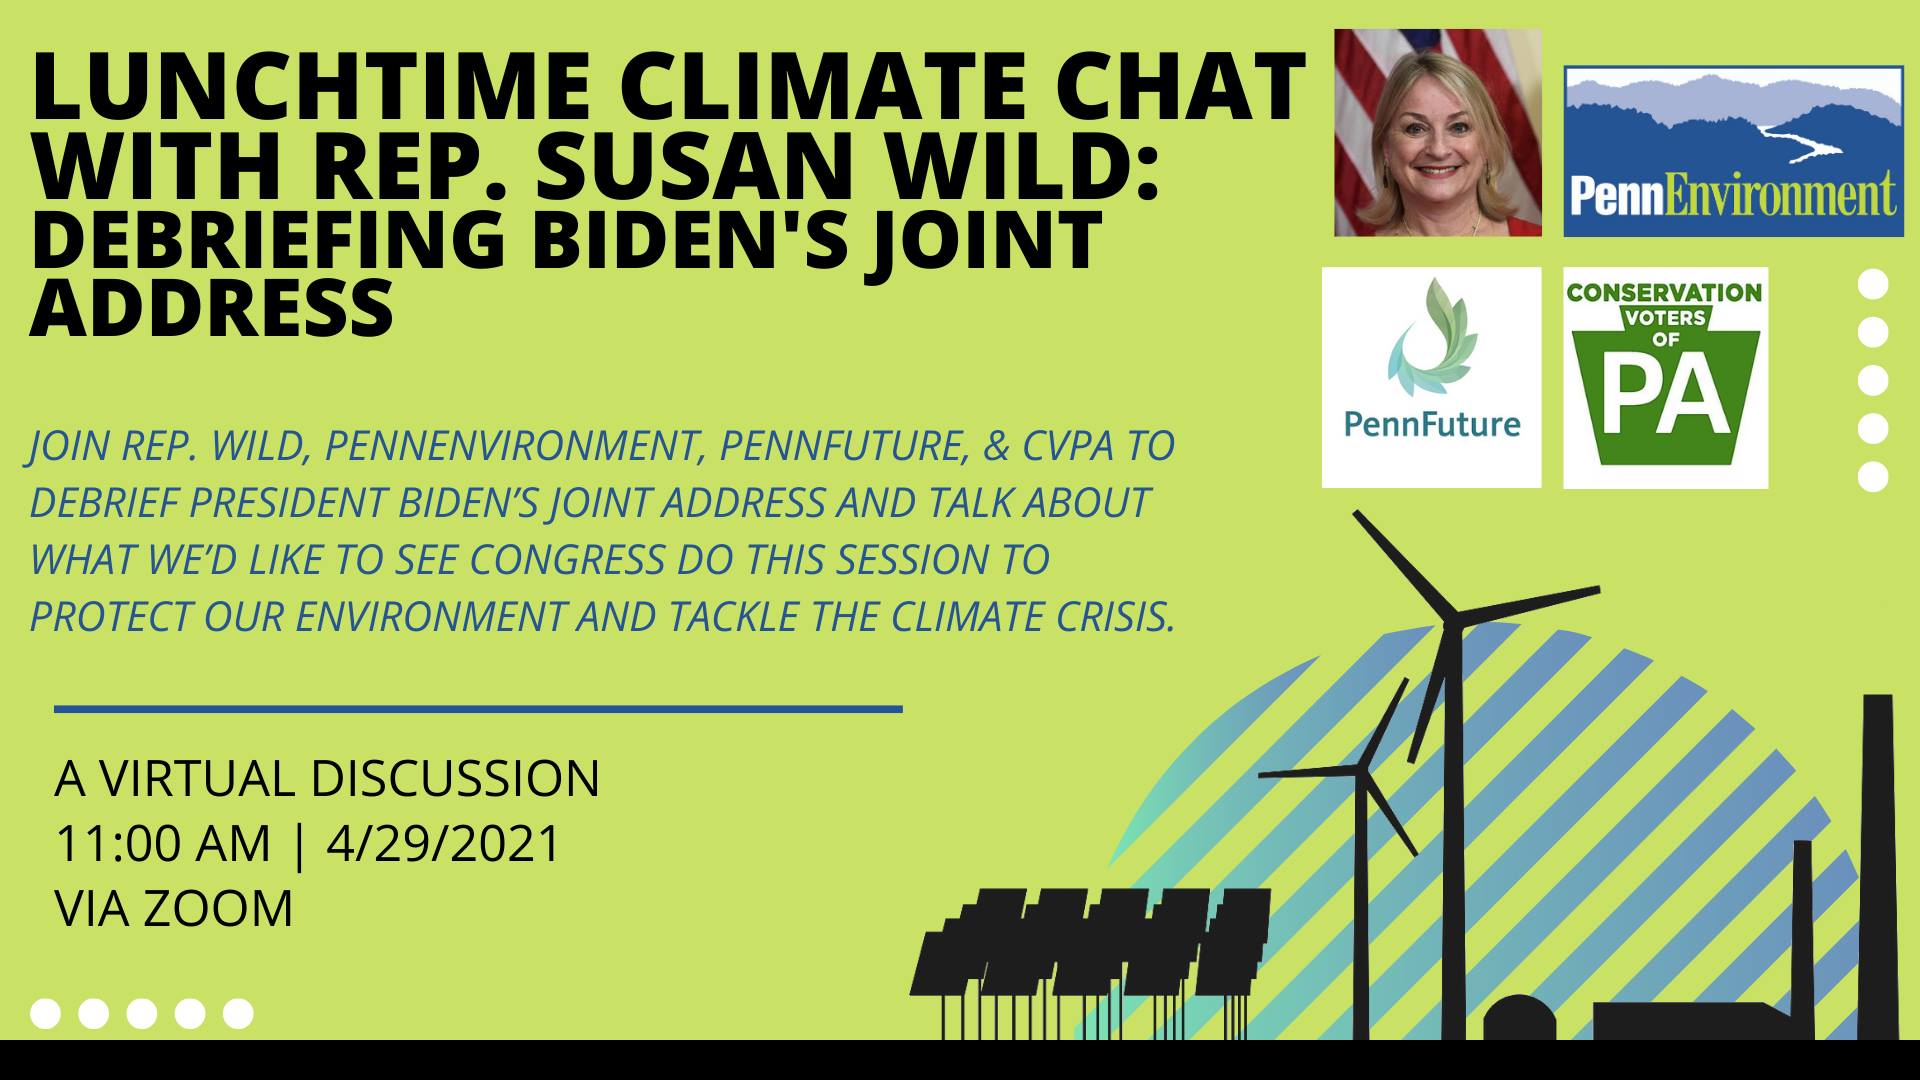 Lunchtime Climate Chat with Rep. Susan Wild: Debriefing Biden's Joint Address